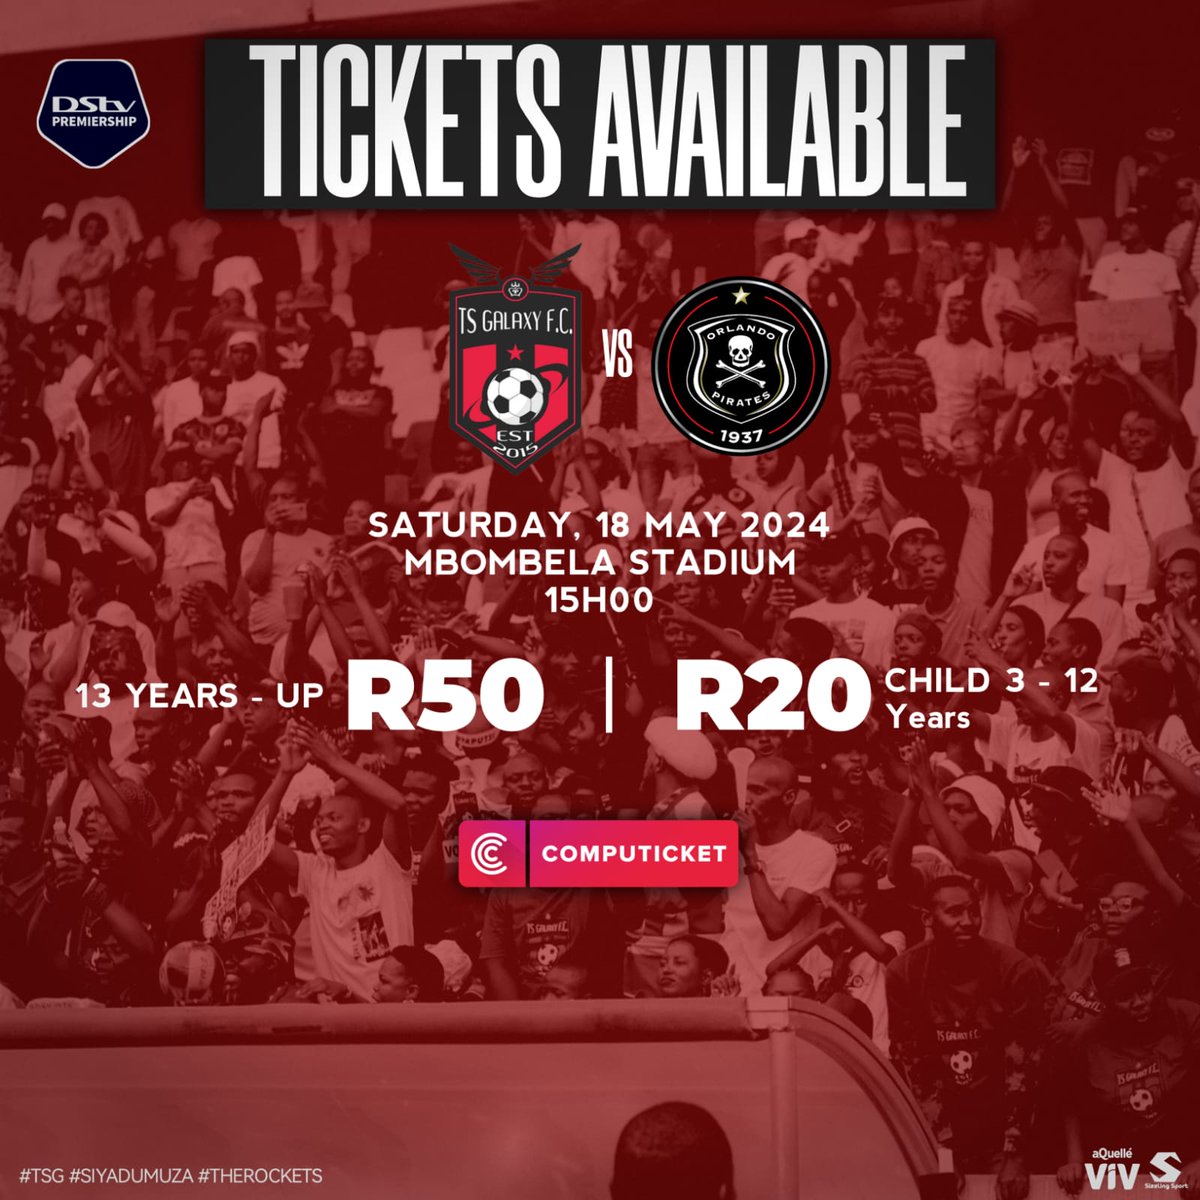 Buy your tickets now and score yourself a seat to our exciting fixture against @orlandopirates! 🚀 @aQuelle @aQuelleViV @Computicket #Siyadumuza #TheRockets #TSG